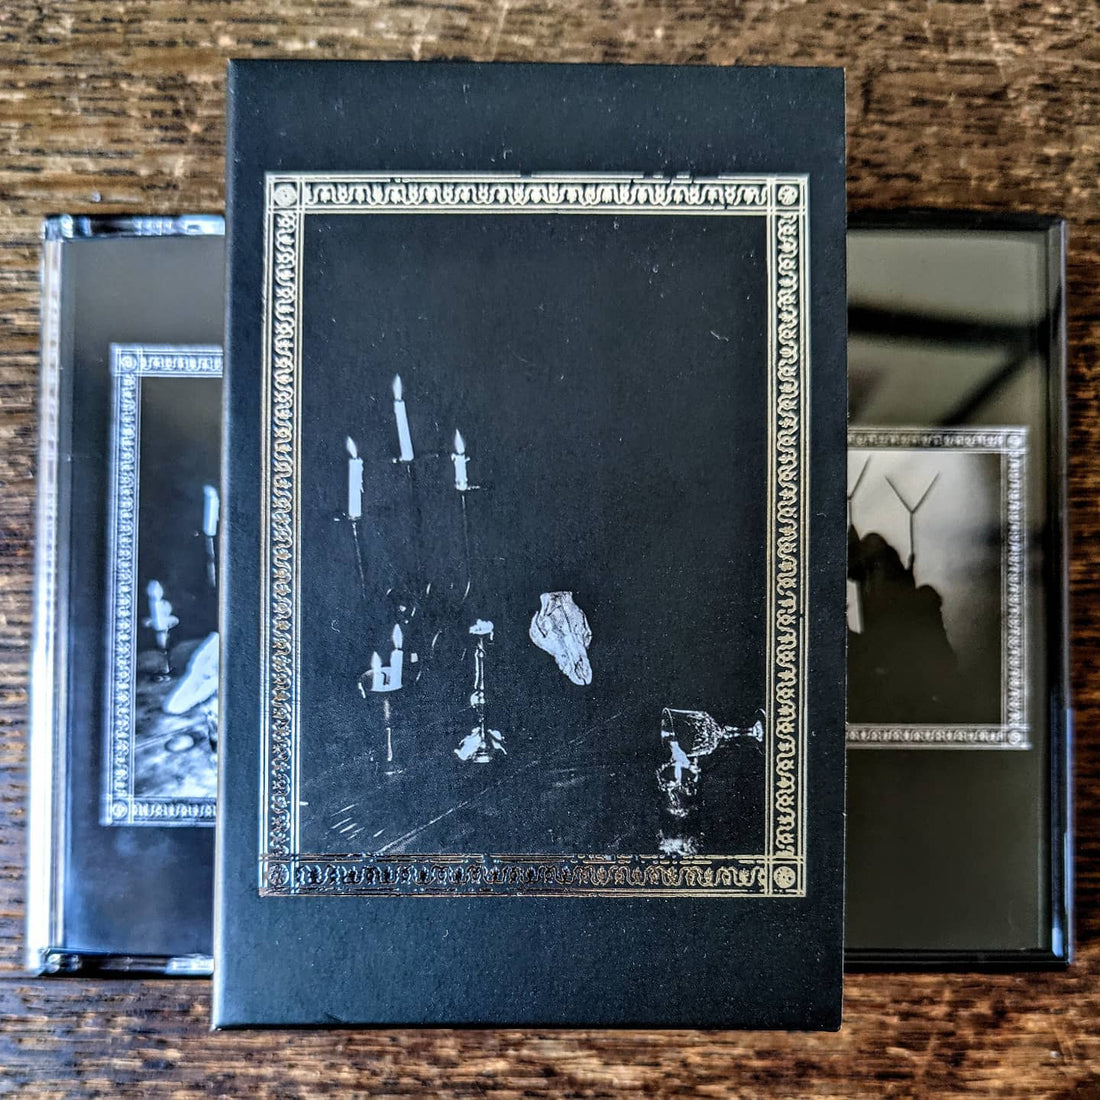 OUT NOW!<br />
SPECTRAL WOUND deluxe 2xMC collecti